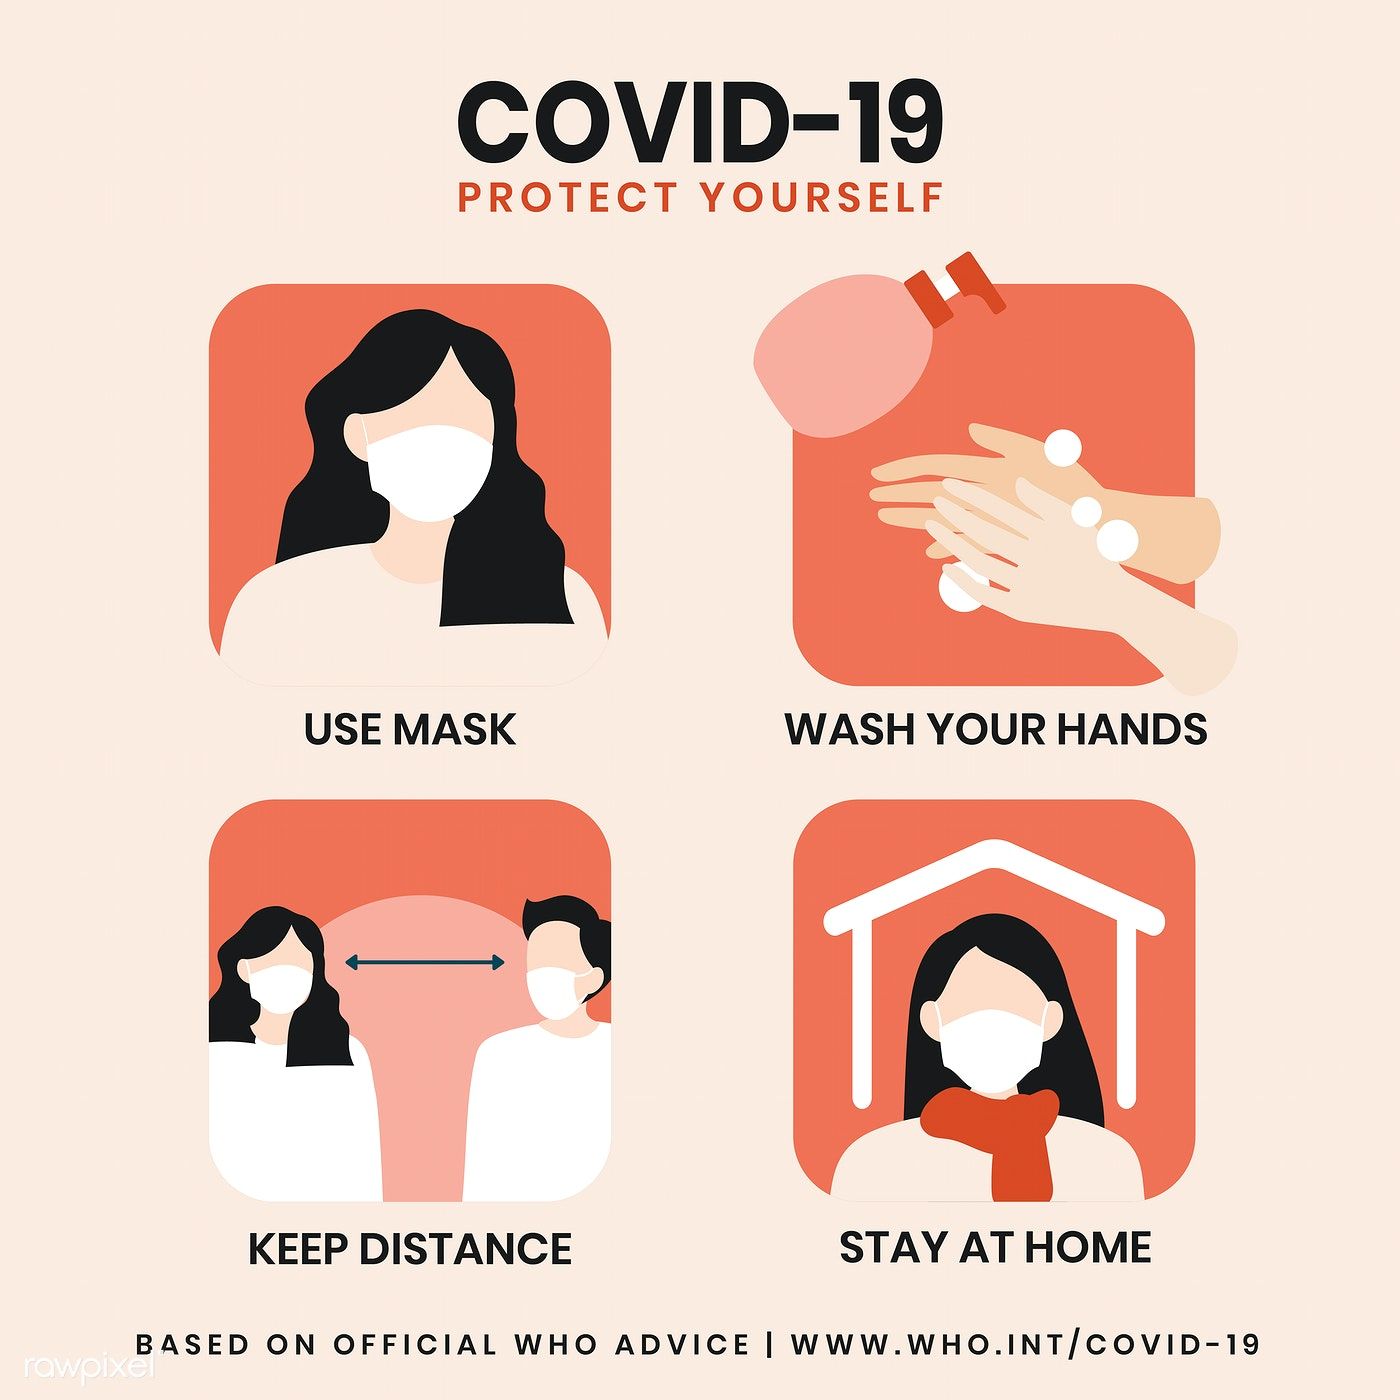 COVID-19 PROTECT YOURSELF: USE MASK, WASH YOUR HANDS, KEEP DISTANCE, STAY AT HOME (Based on official WHO advice, www.who.int/covid-19 )